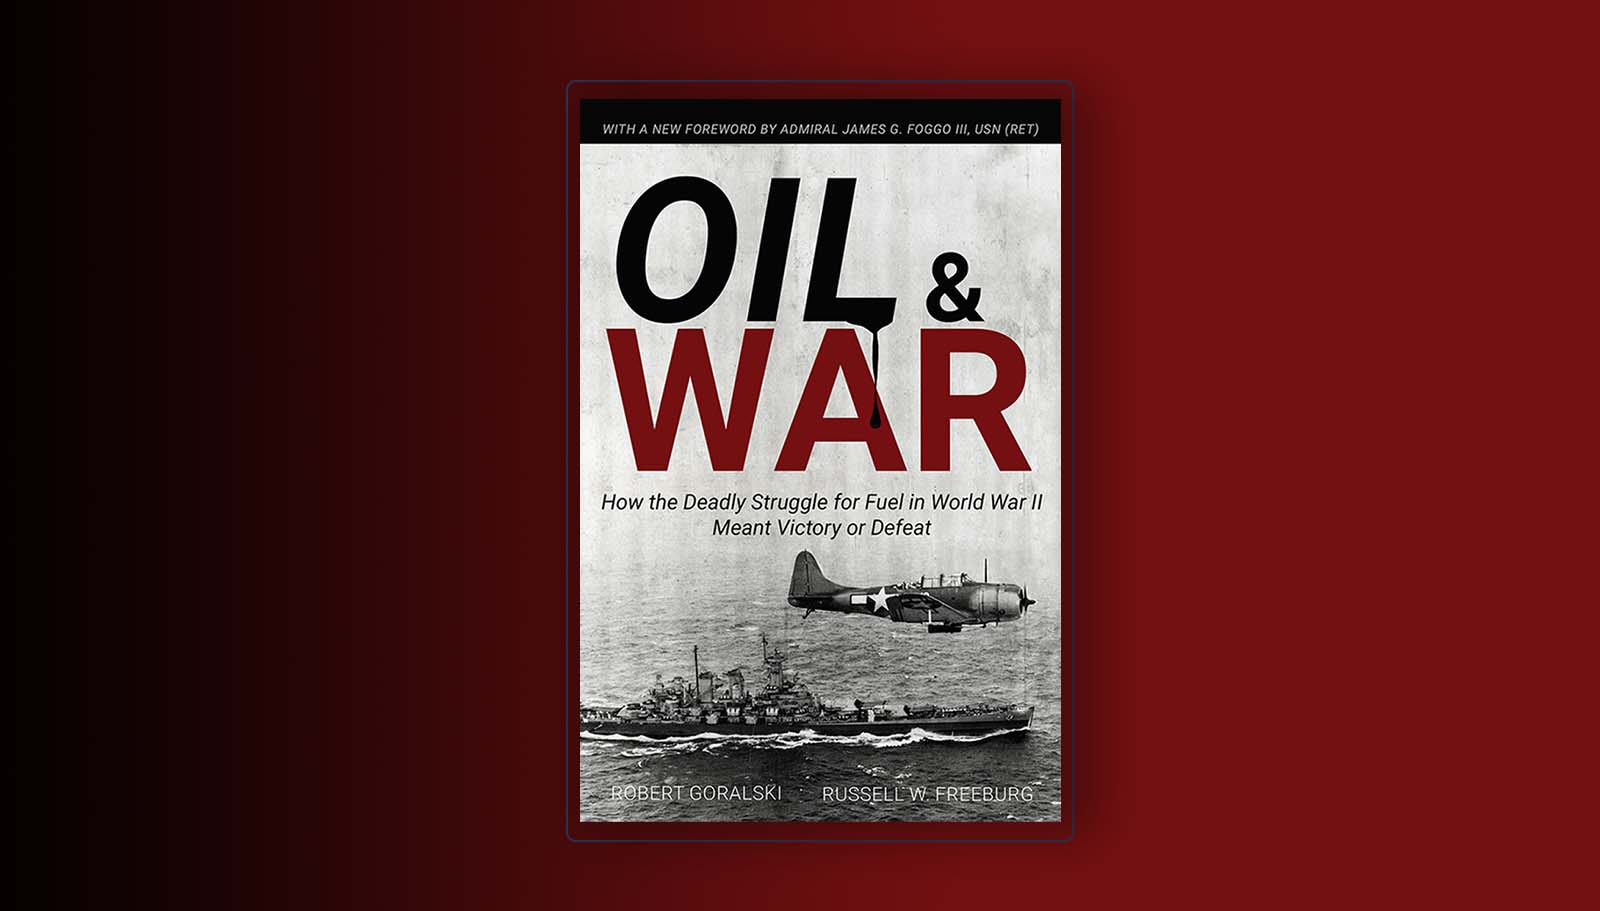 “Oil & War: How the Deadly Struggle for Fuel in WWII Meant Victory or Defeat” by Robert Goralski and Russell W. Freeburg.Marine Corps University Press, 1987, 384pp, $30 (or free online.)